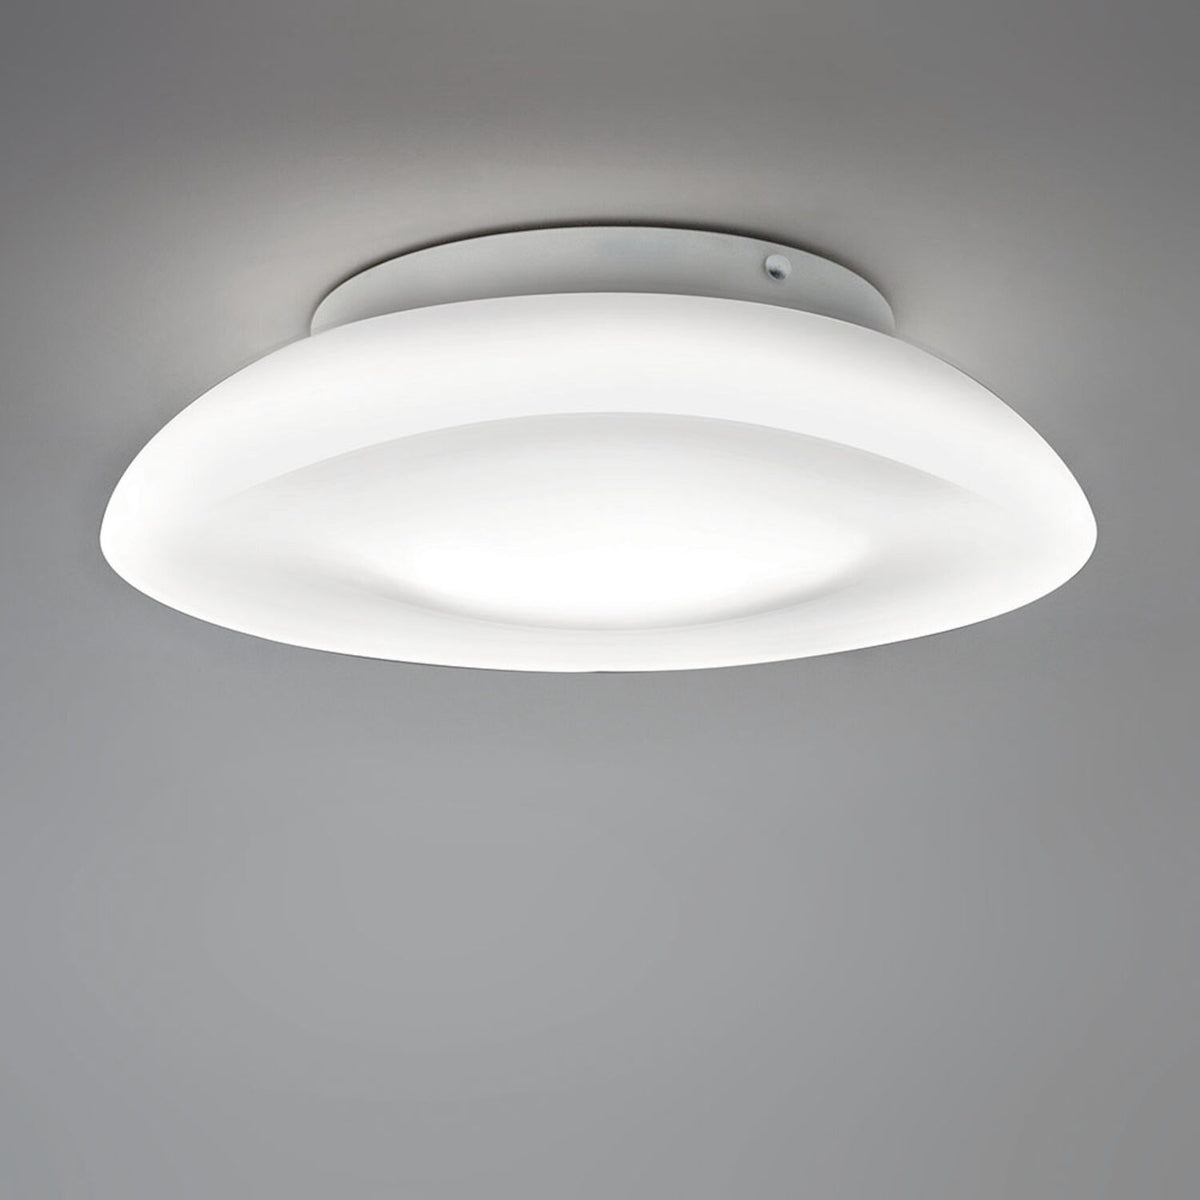 LUNEX 15-INCH WALL/CEILING LIGHT NON-DIMMABLE